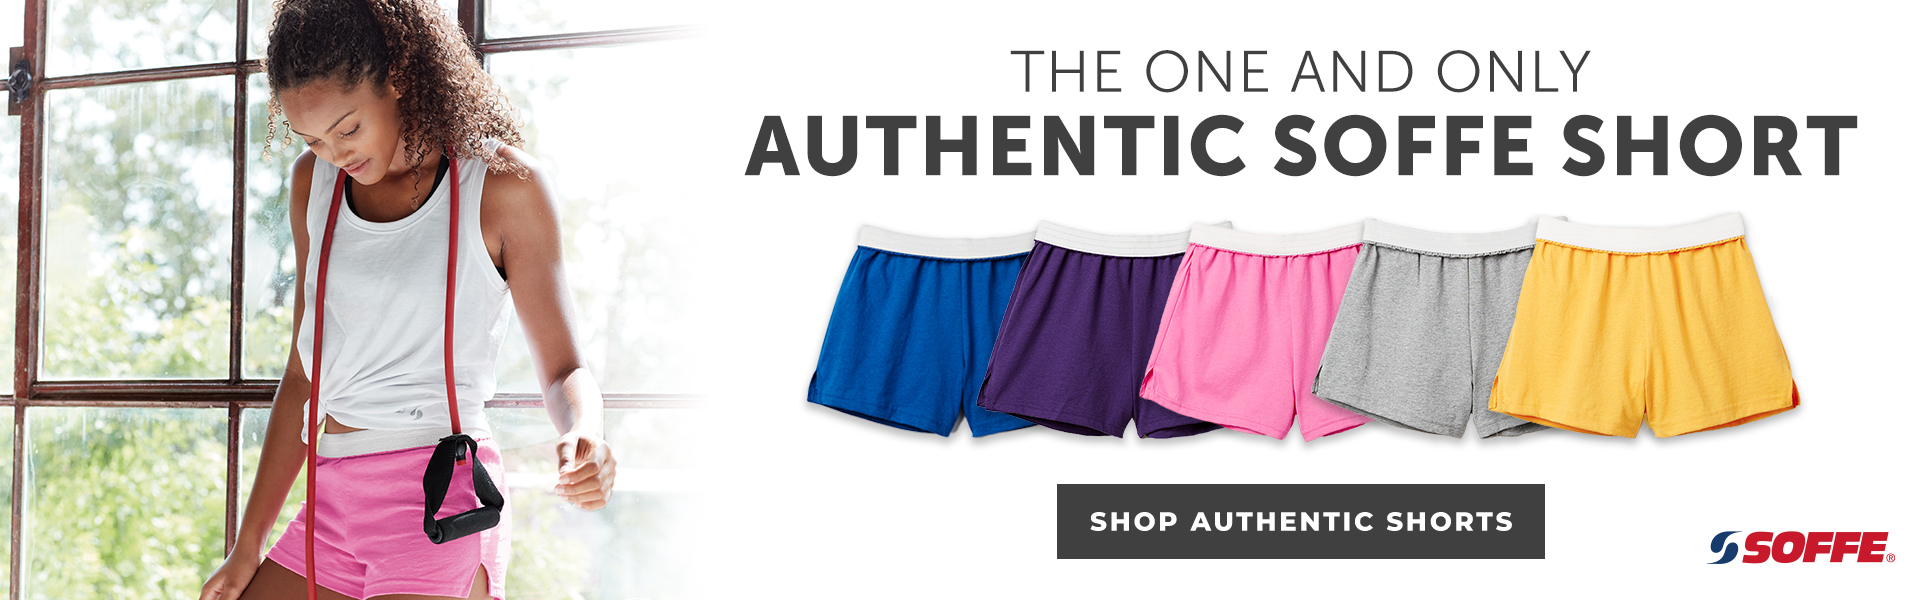 shop soffe authentic cheer shorts